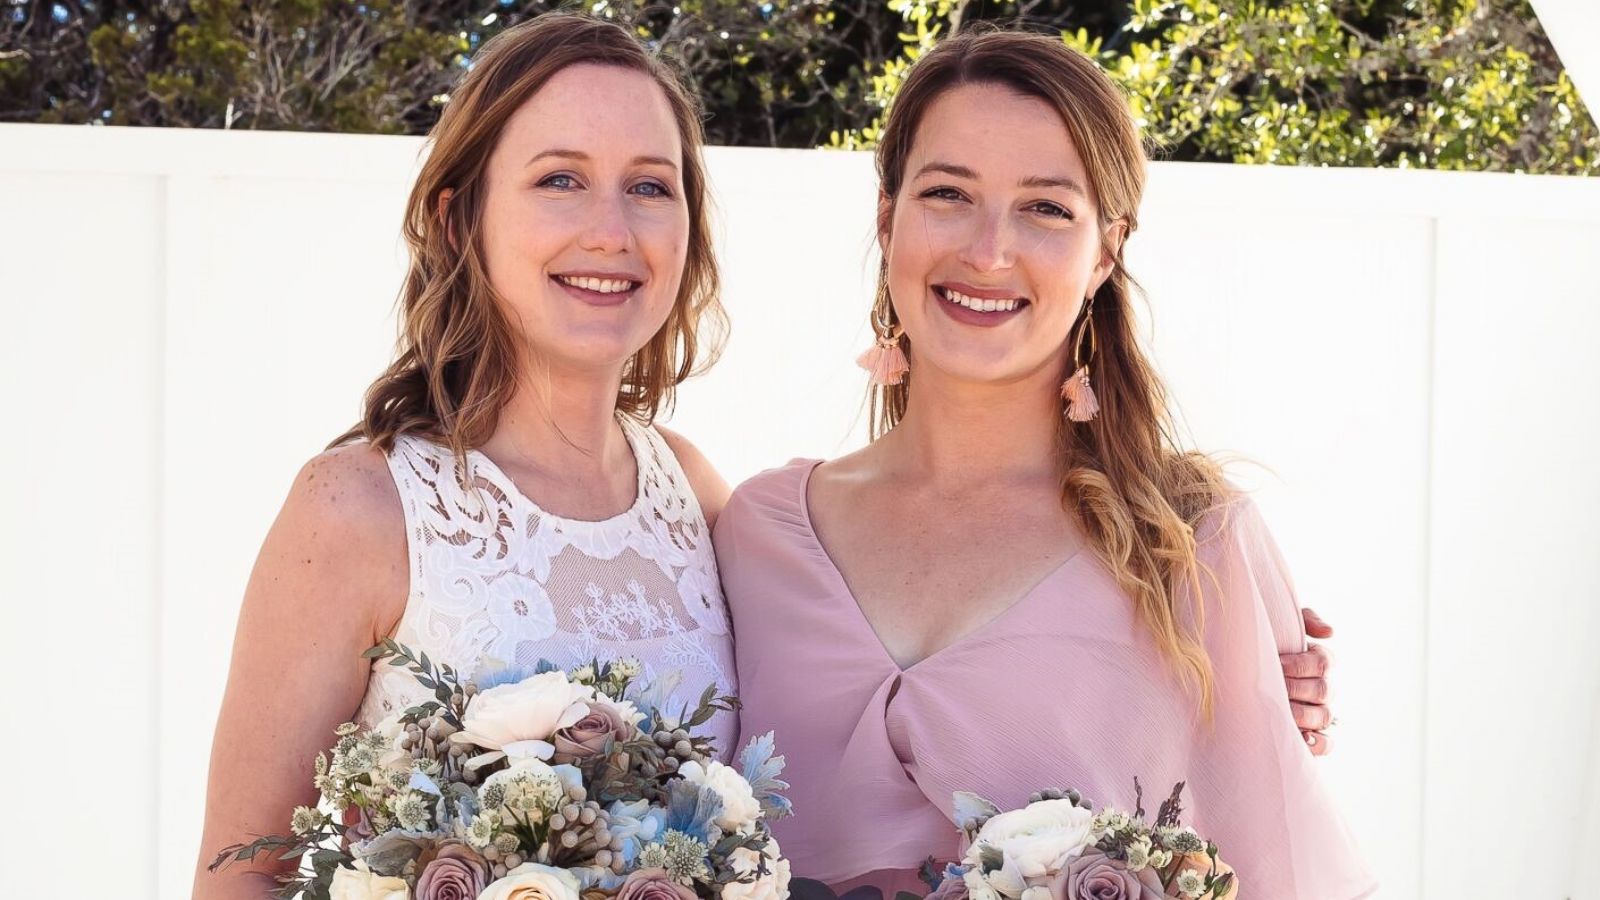 PHOTO: Kelli Schultz and her sister Brianna DuPriest on DuPriest's wedding day on April 14, 2018.